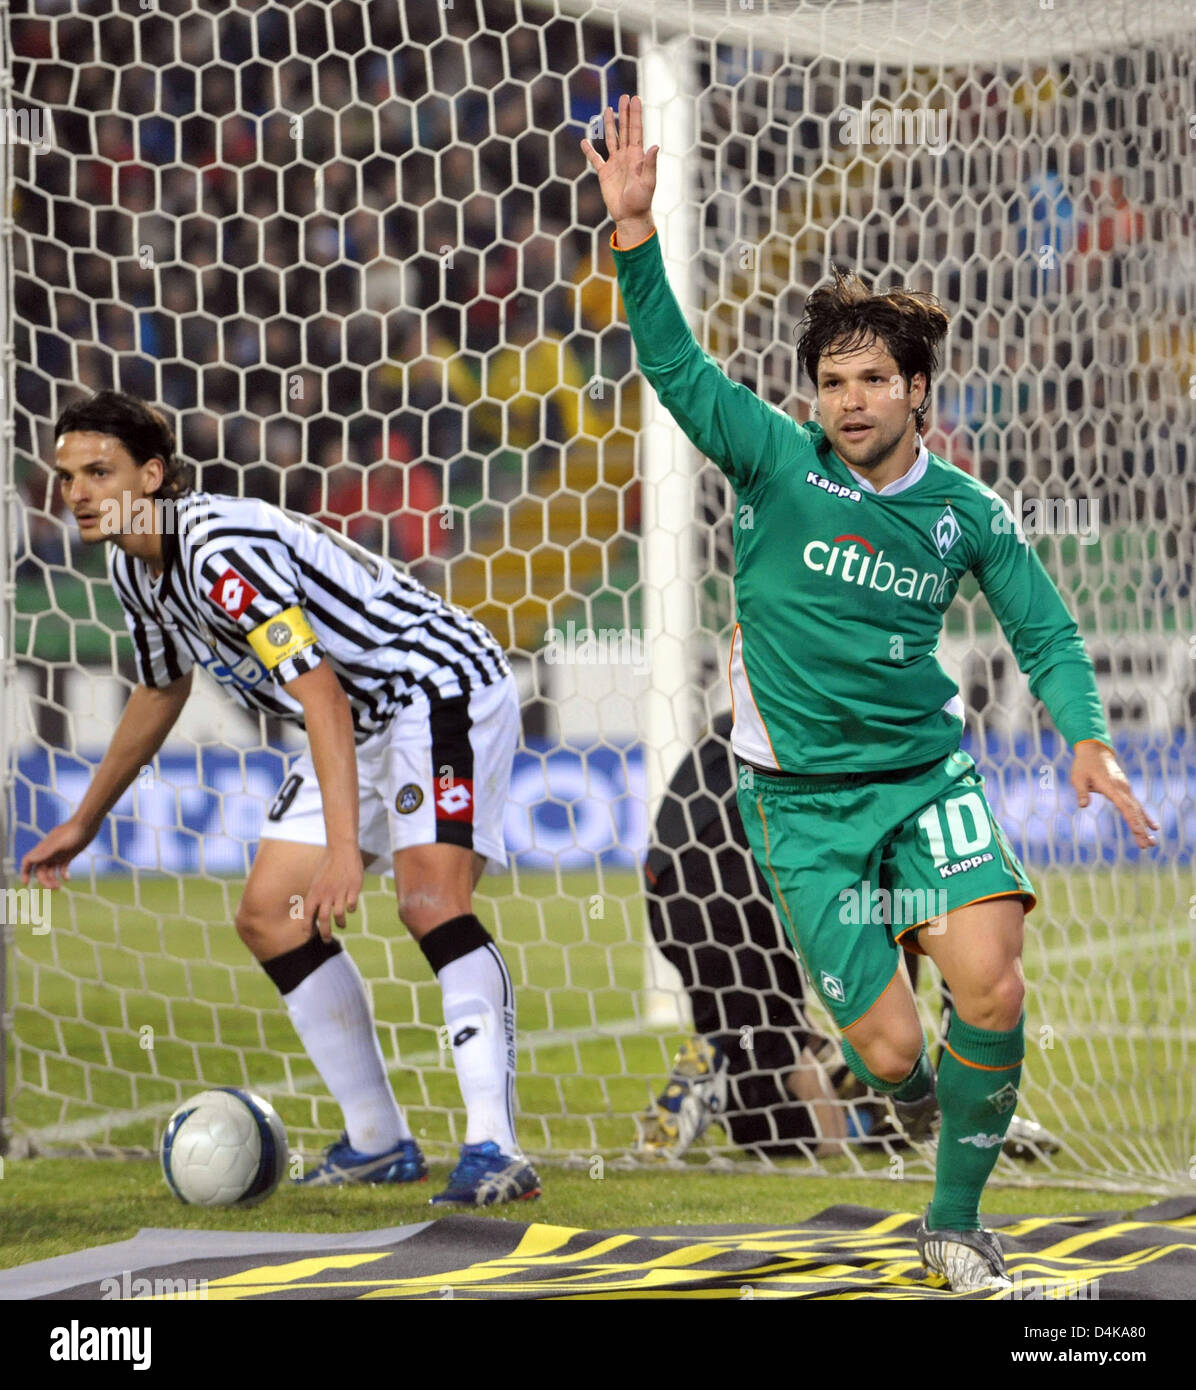 Bremen?s Diego (R) cheers after his second goal to 3-2 during the UEFA Cup quarter finals second leg match Udinese vs Werder Bremen at Stadio Friuli in Udine, Italy, 16 April 2009. The match tied 3-3. Photo: Carmen Jaspersen Stock Photo